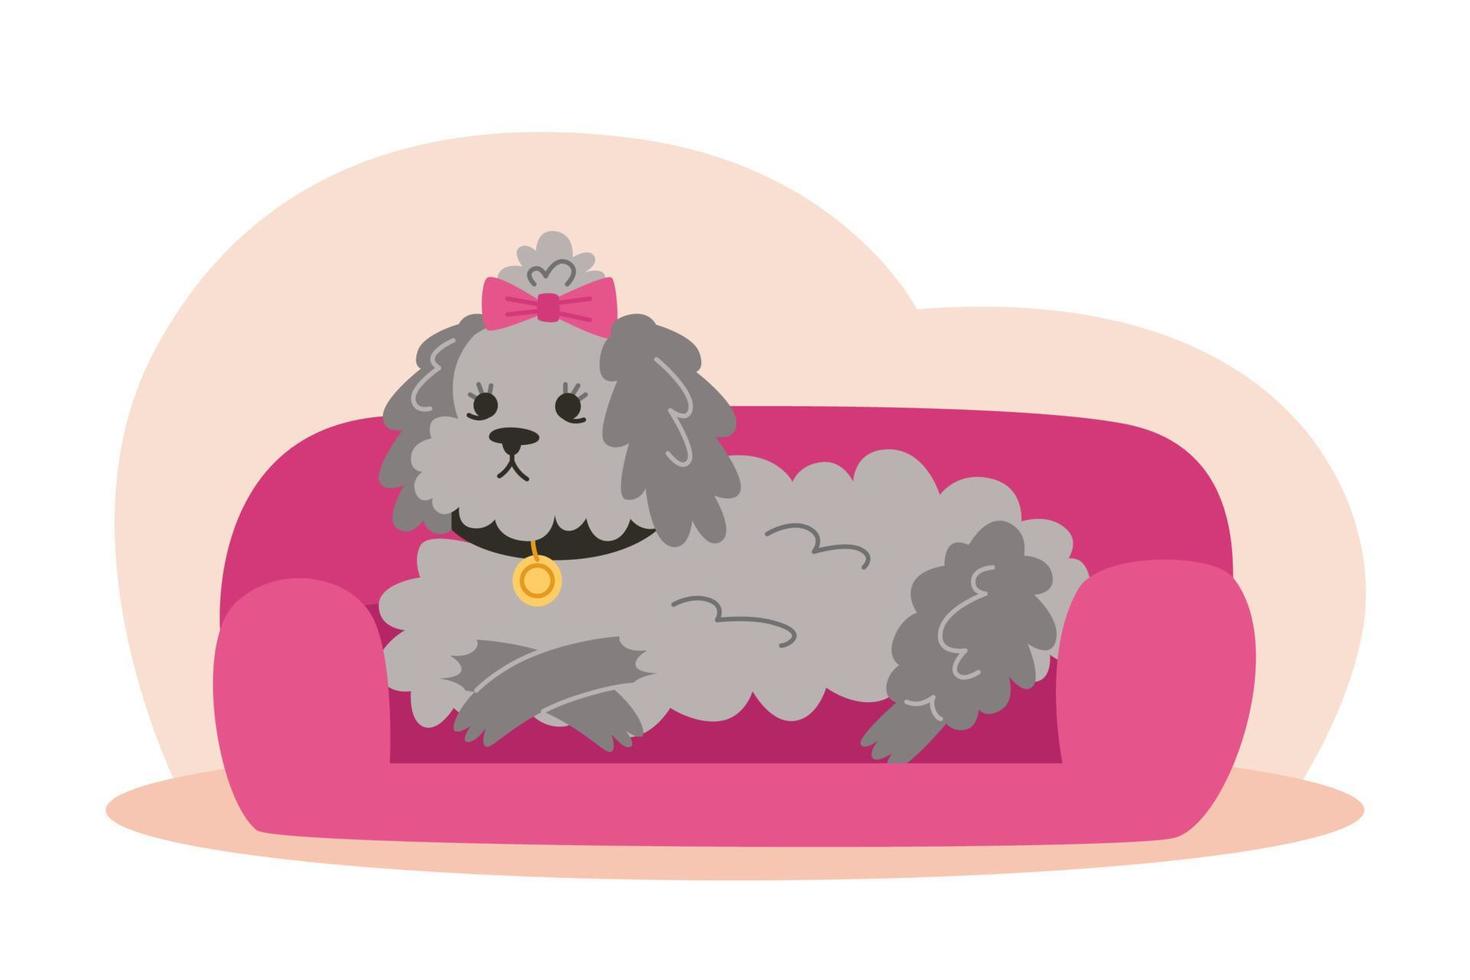 Curly dog lying on pet bed illustration in flat style vector